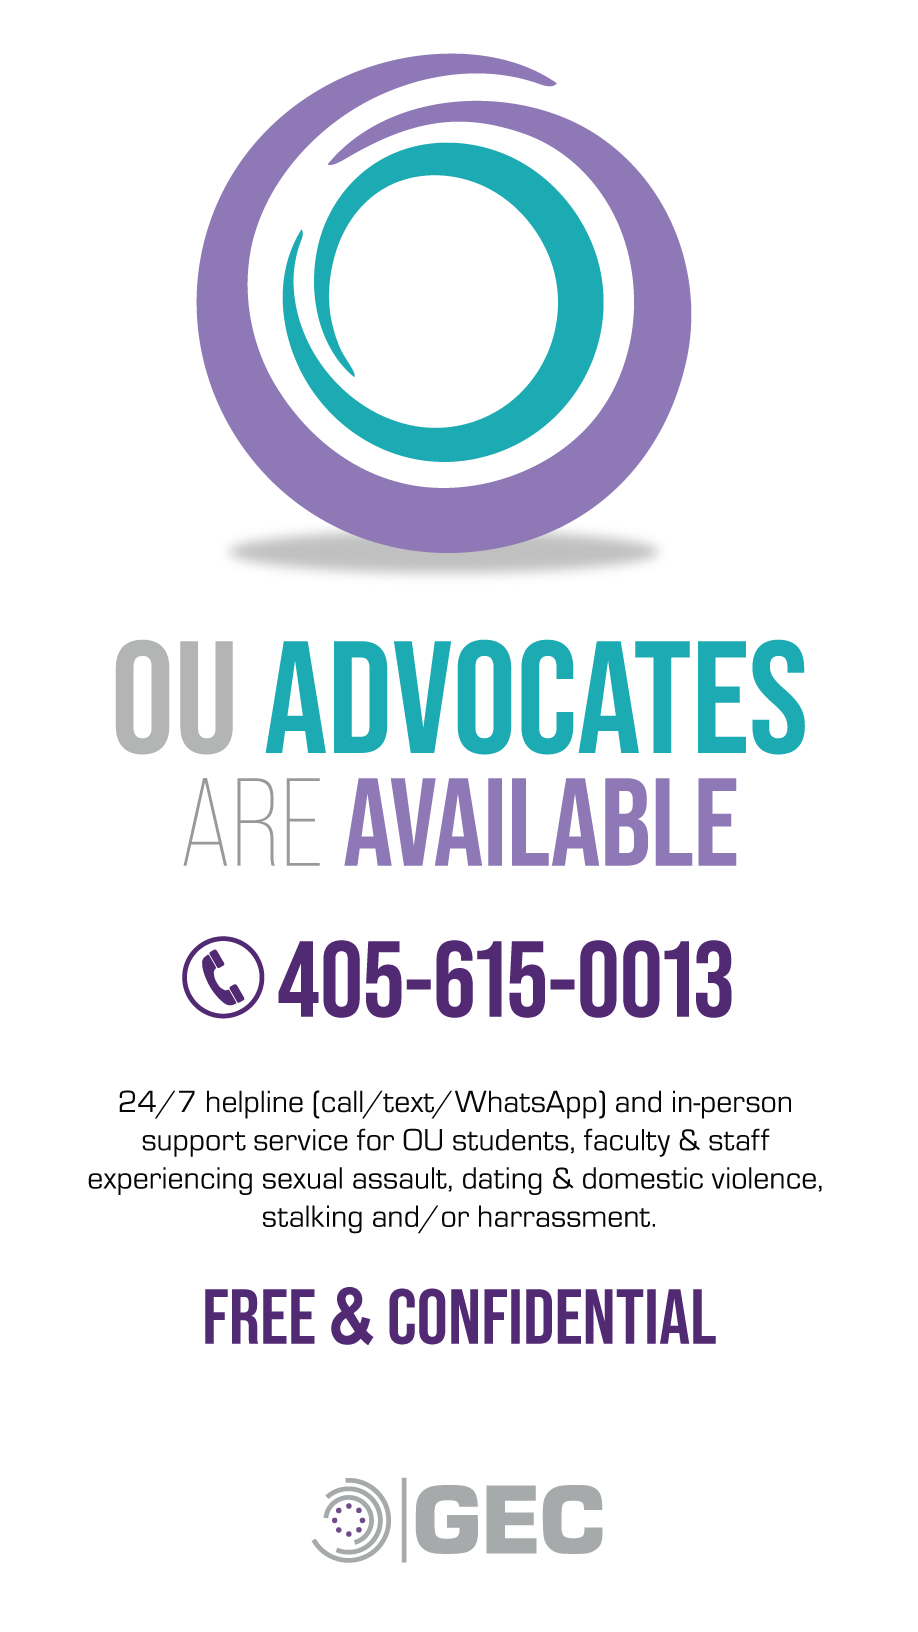 OU Advocates are available, 405-615-0013. 24/7 helpline (call/text/WhatsApp) and in-person support services for OU students, faculty and staff experiencing sexual assault, dating and domestic violence, stalking and/or harassment. Free and confidential. GEC logo. 